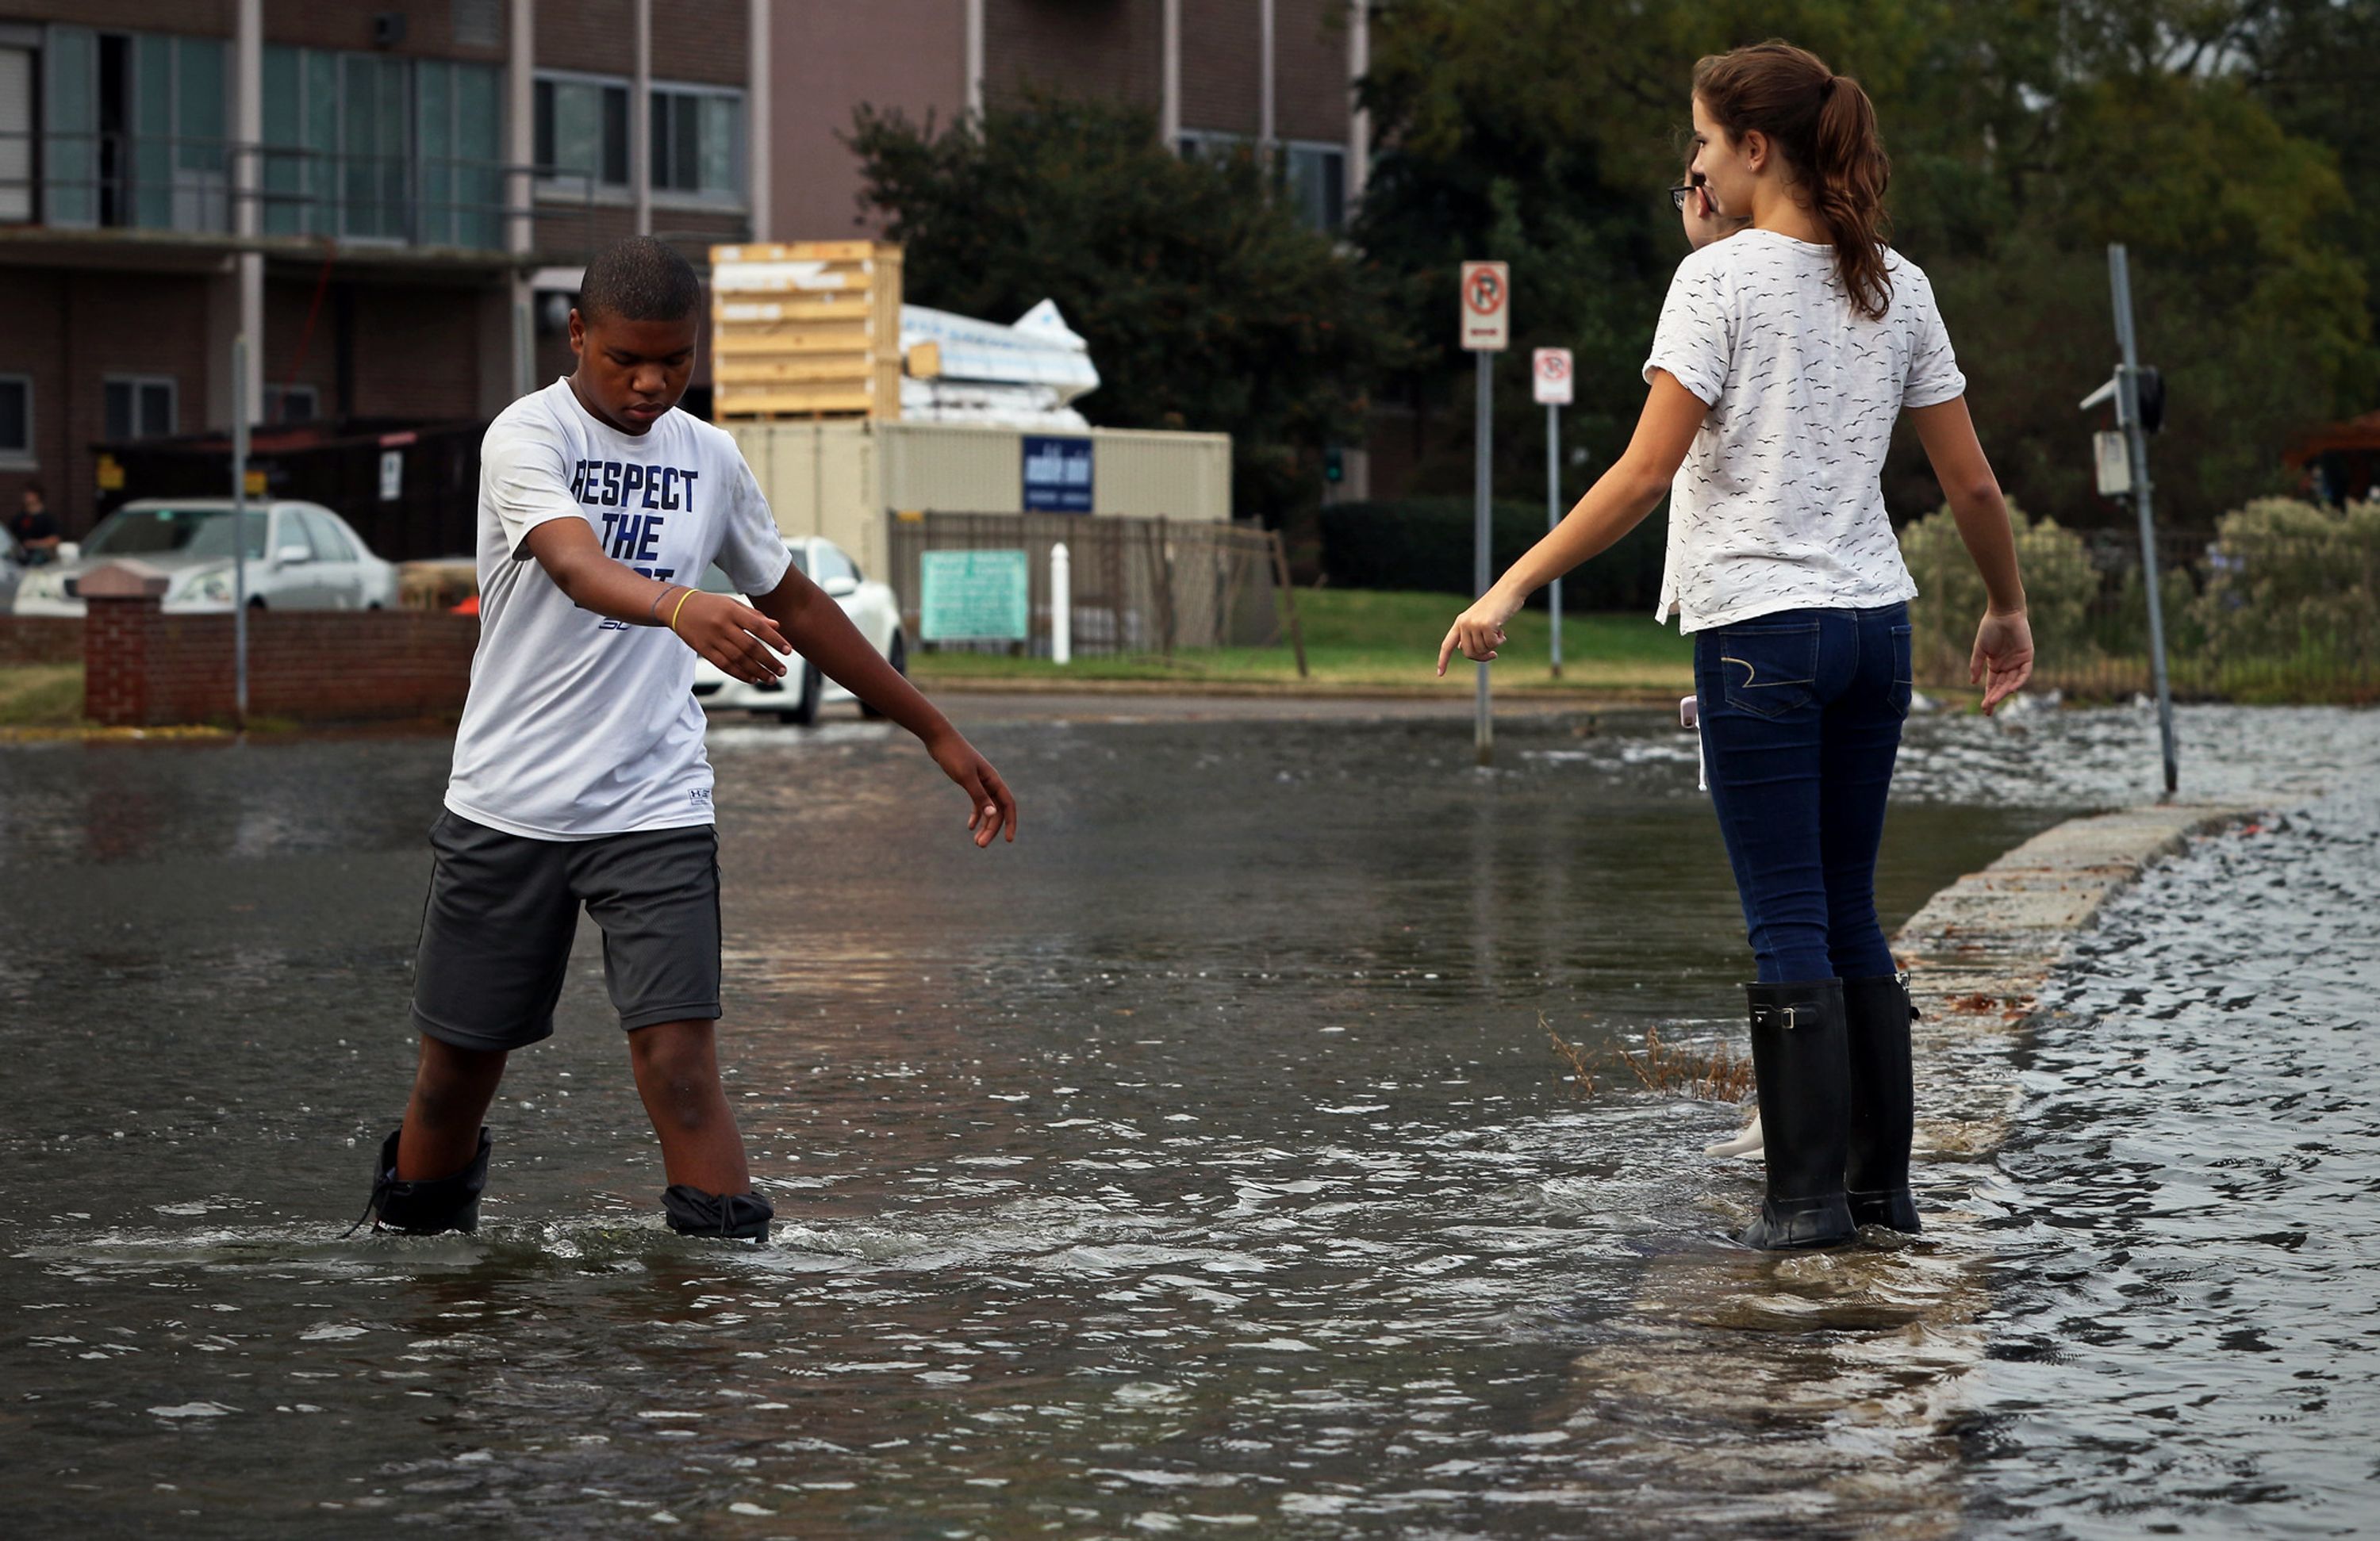 Children in Norfolk, Virginia, record the "king tide" after a flood in 2019